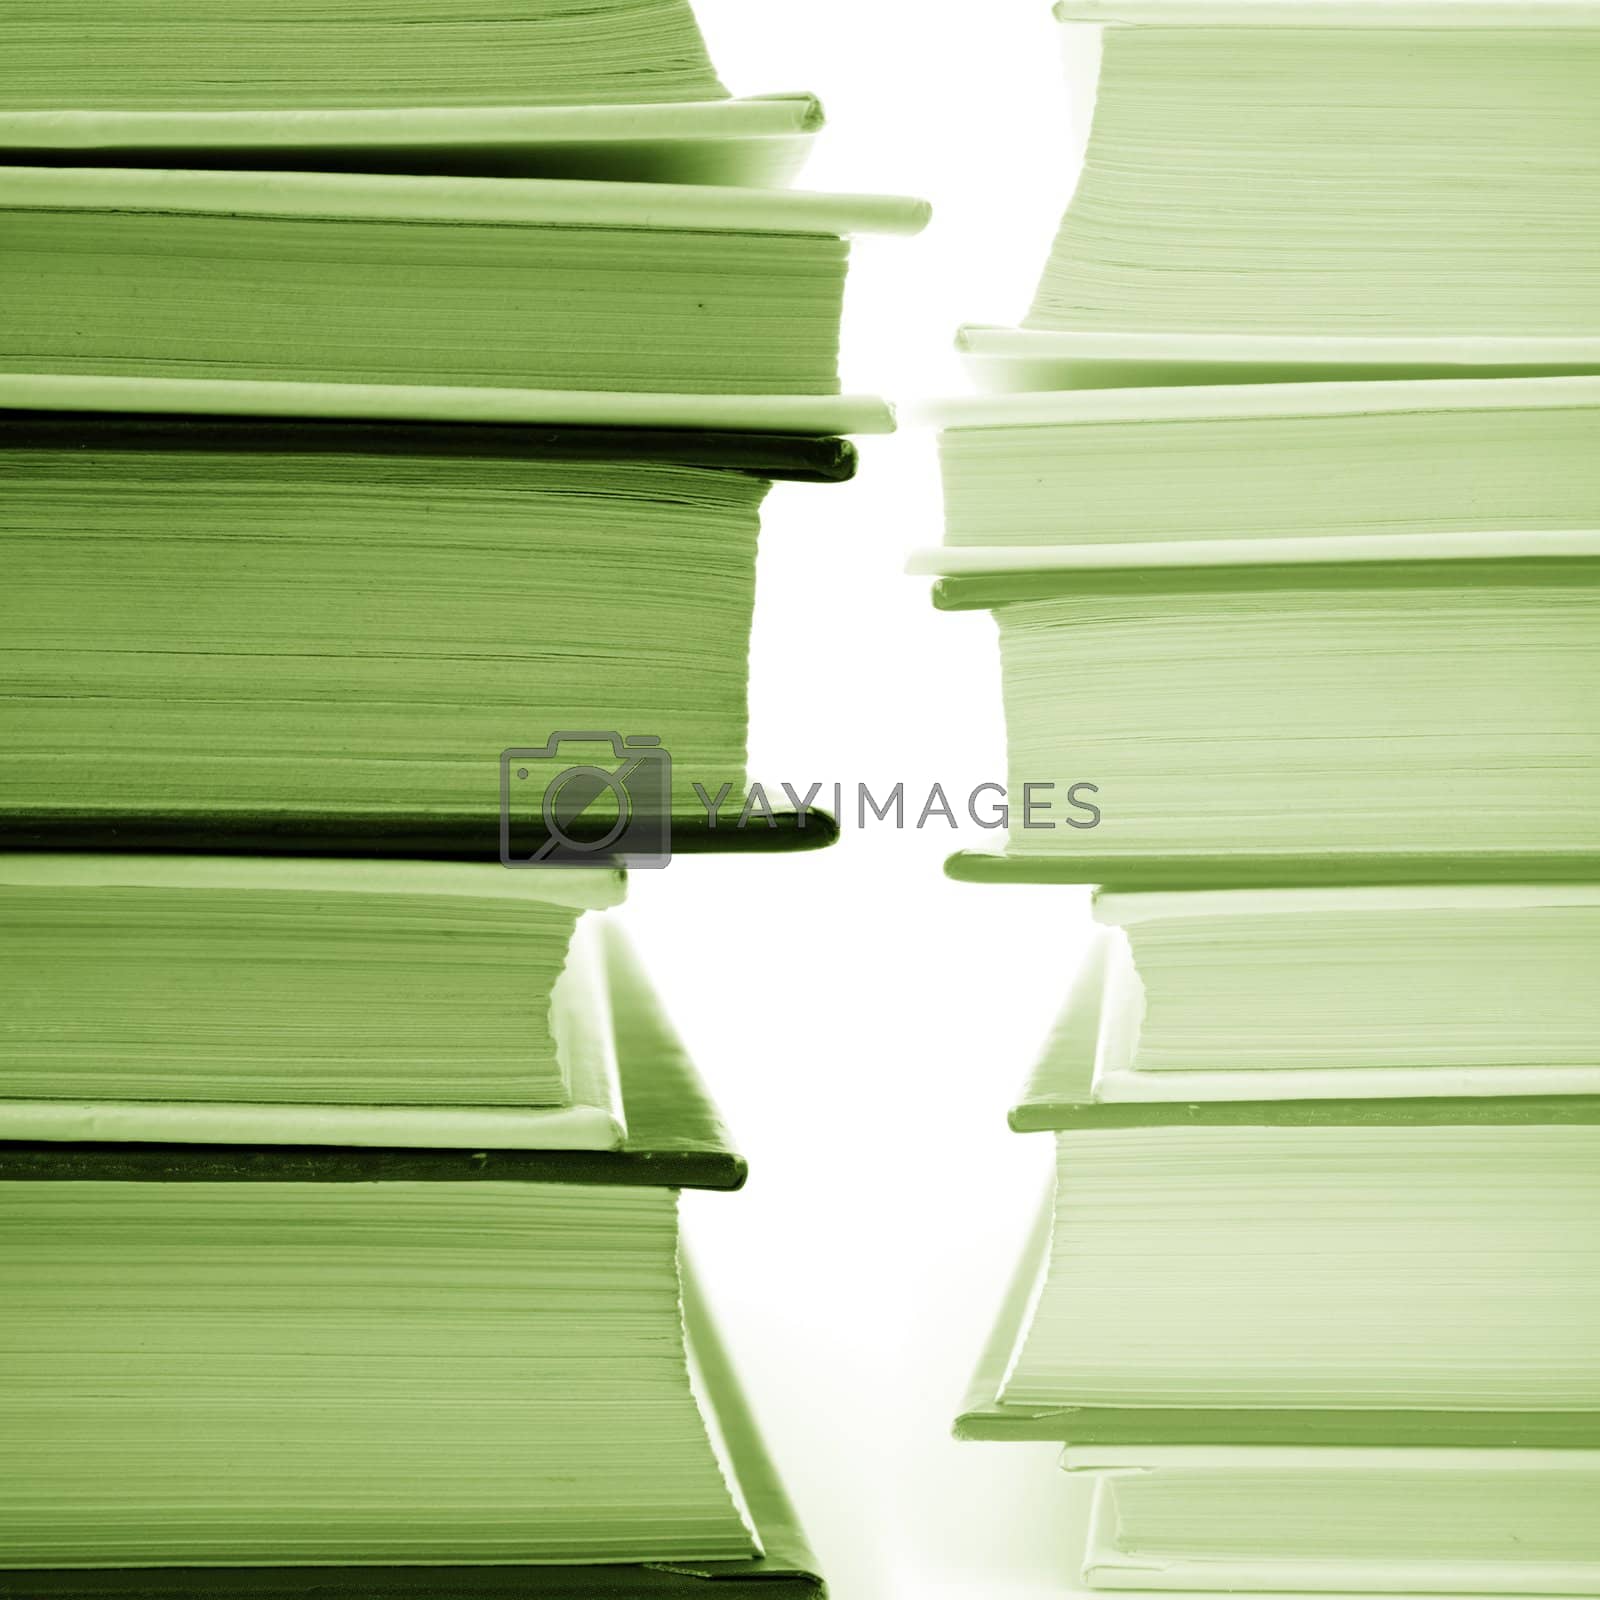 Royalty free image of stack of books by marylooo